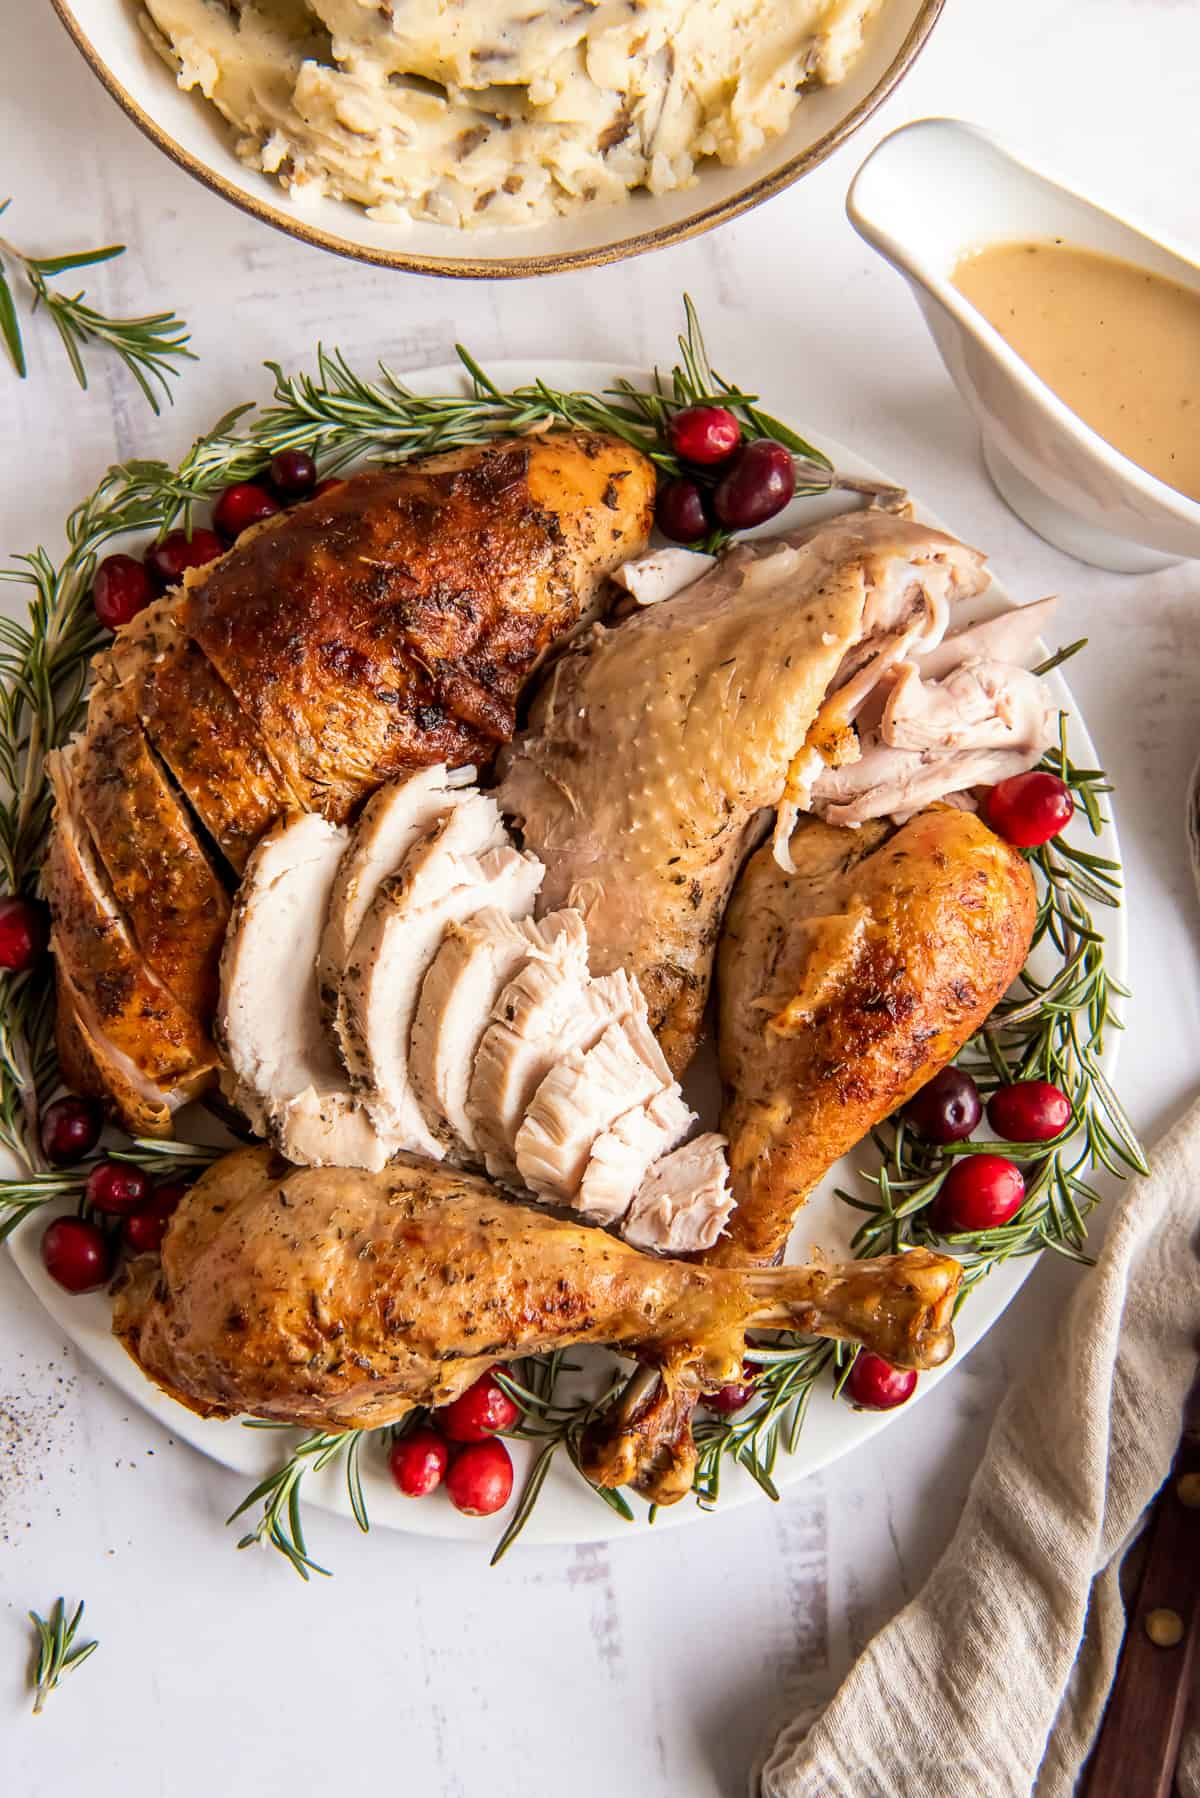 Turkey on a platter with rosemary and cranberries.